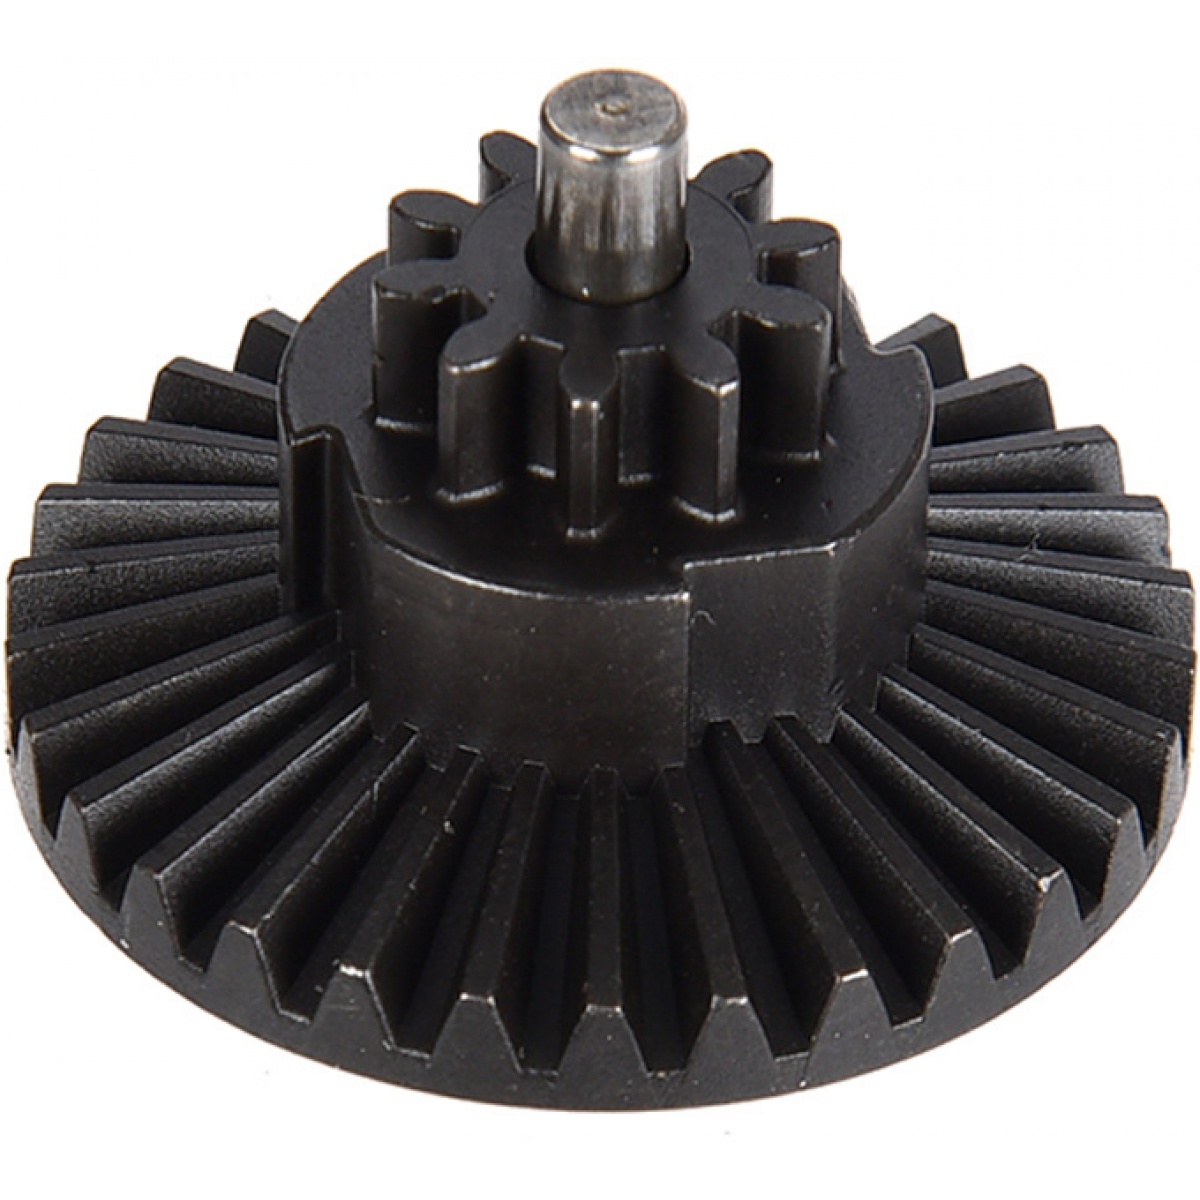 LCT Airsoft High Torque Bevel Gear for Version 2 / 3 Gearboxes ...